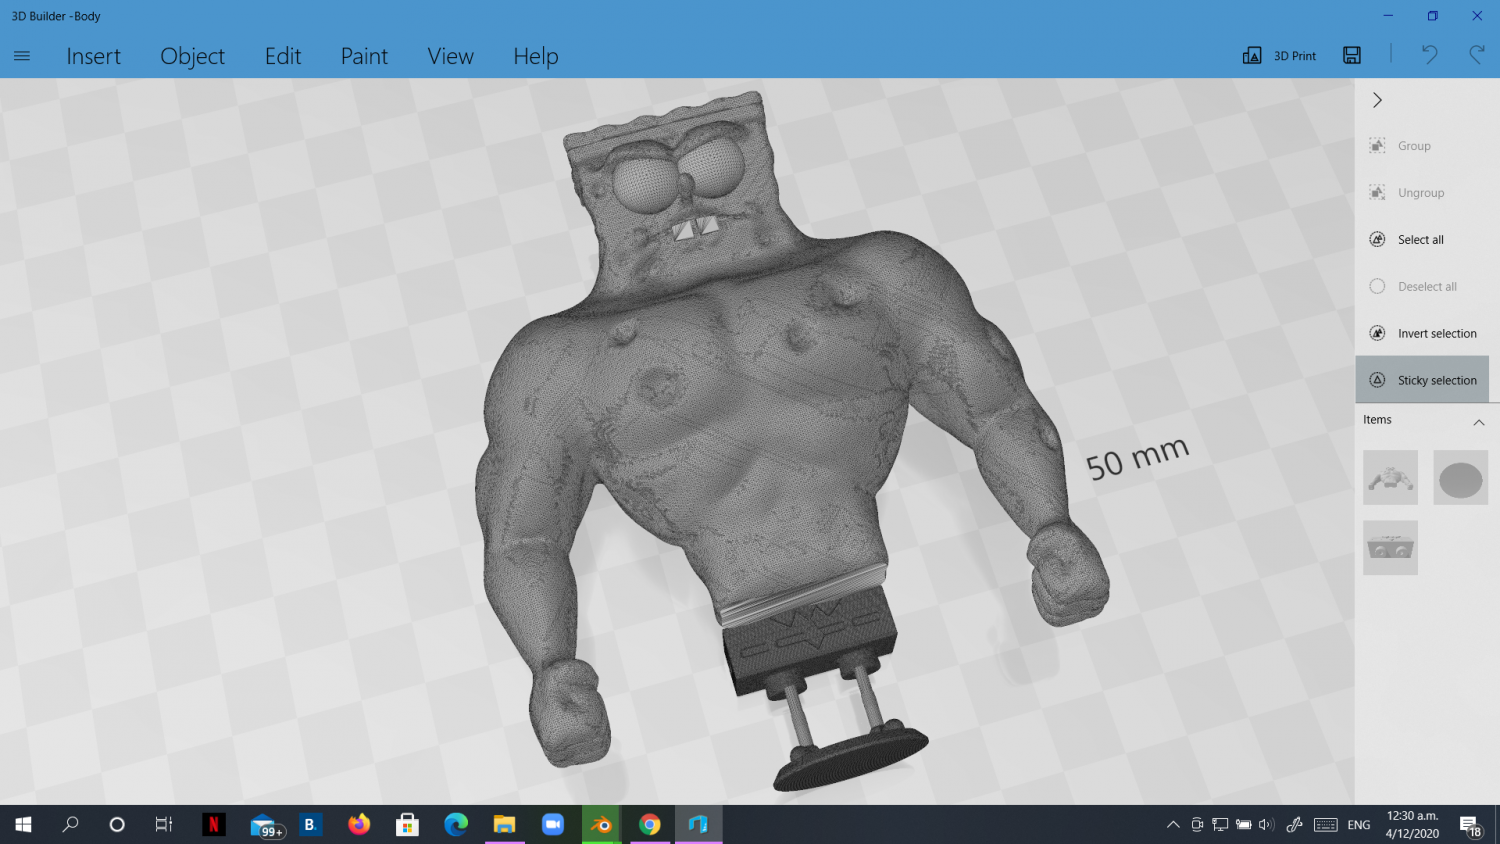 Create meme roblox shirt, muscles to get - Pictures 